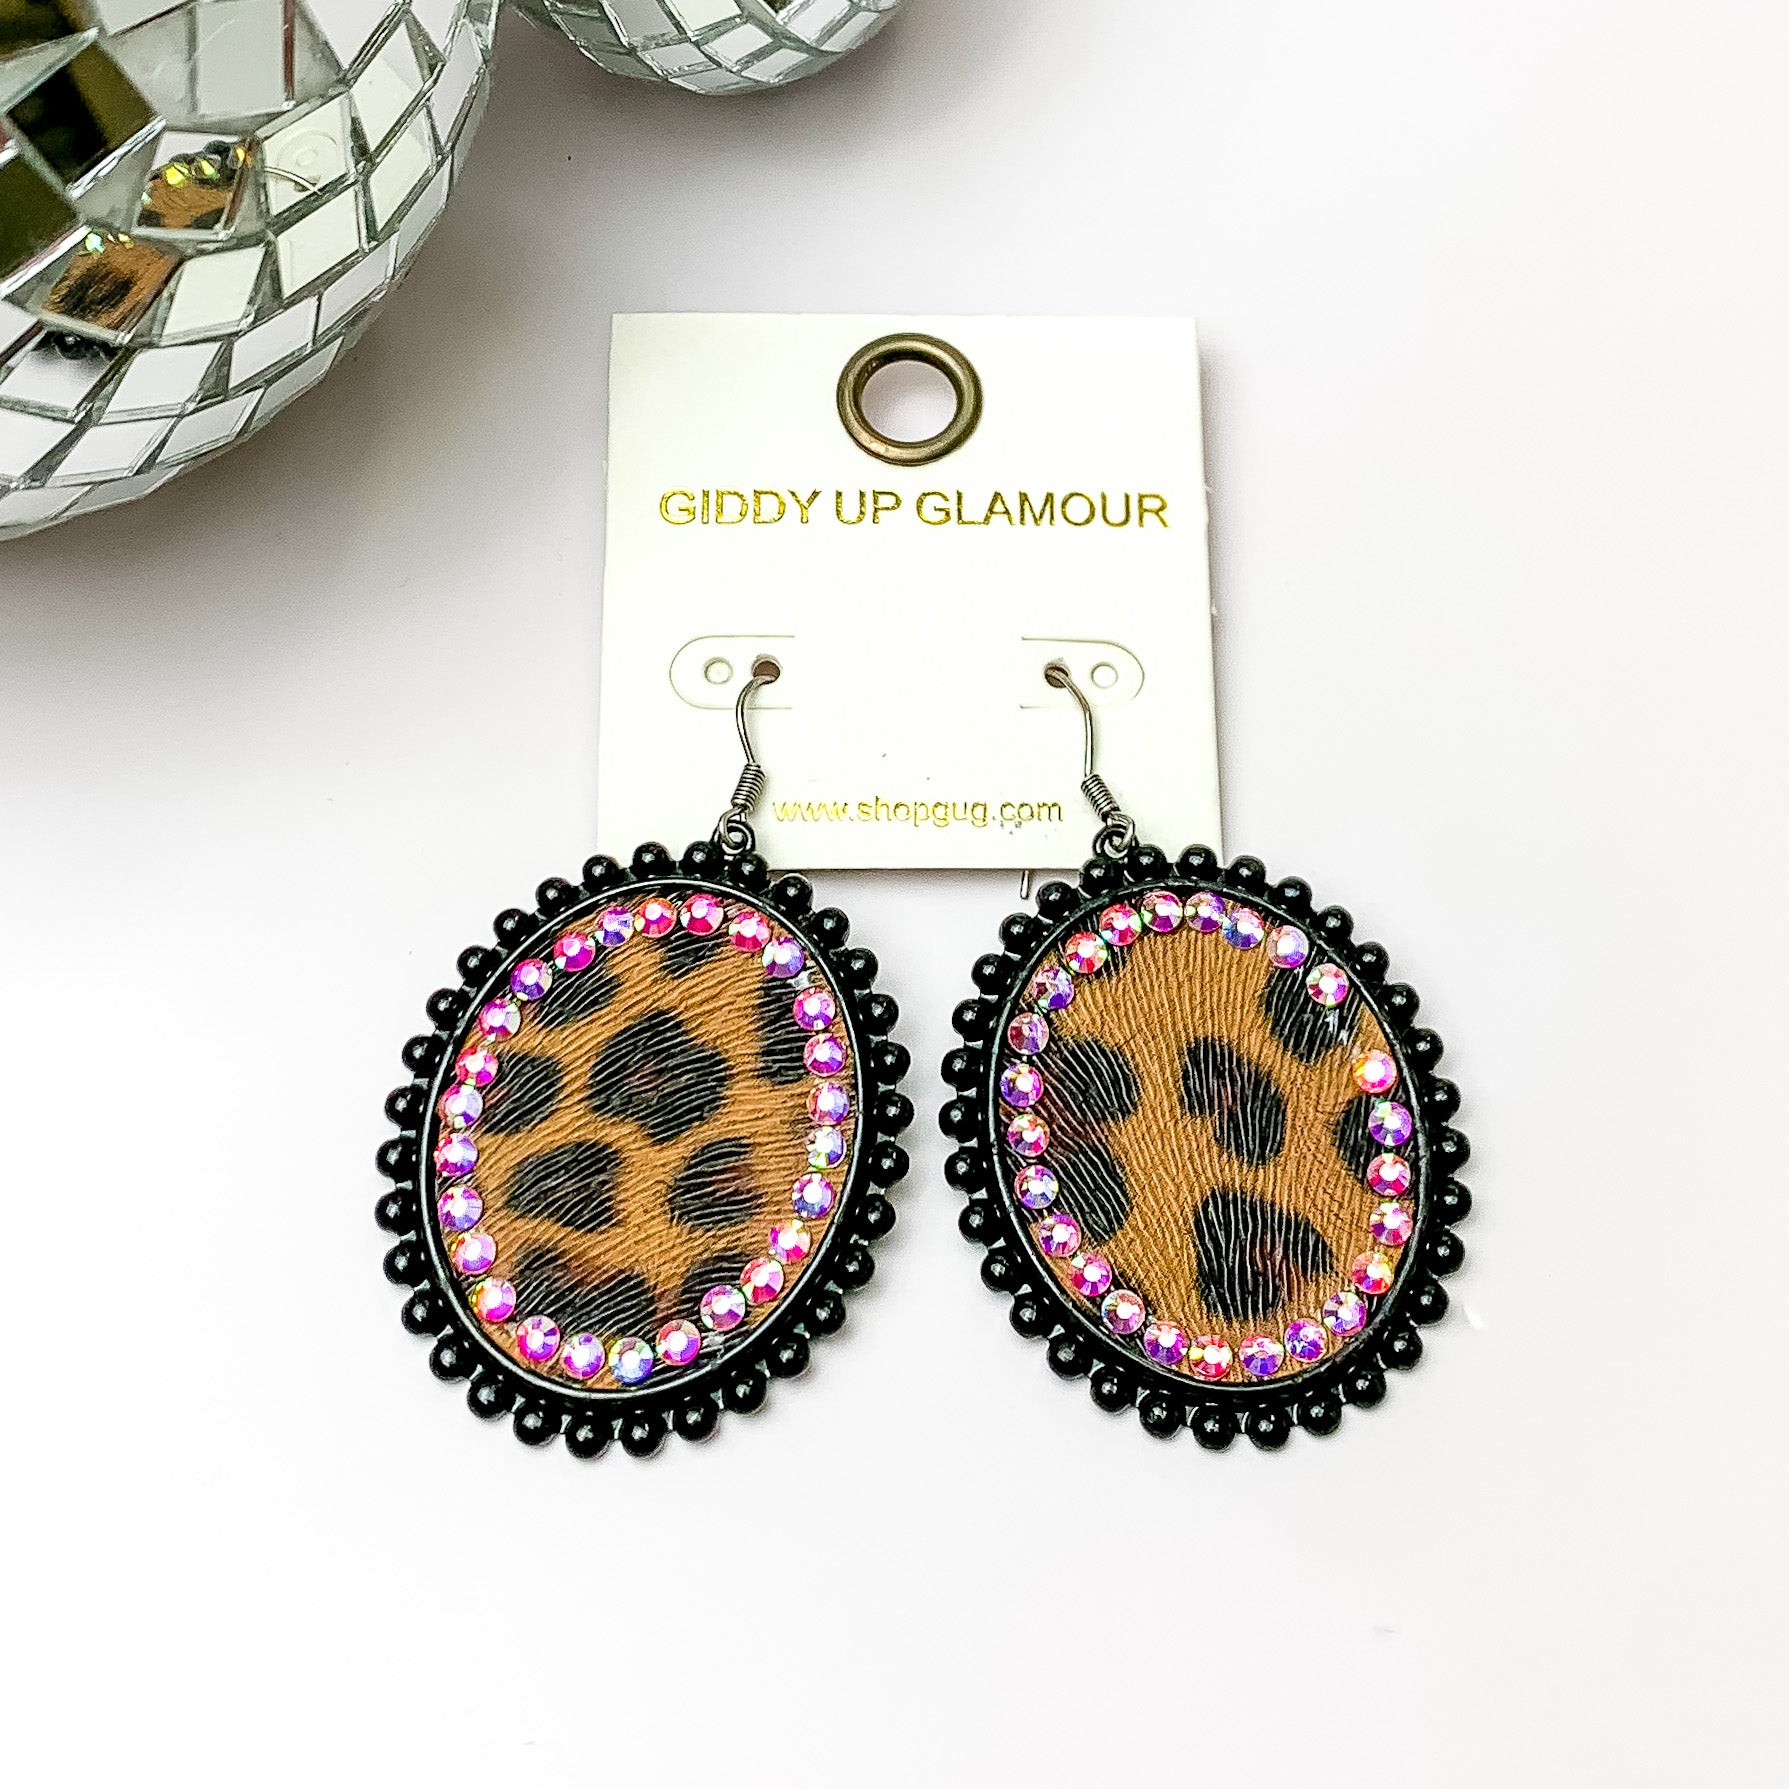 Black Oval Earrings with Leopard Print Inlay and Black Crystal Outline - Giddy Up Glamour Boutique